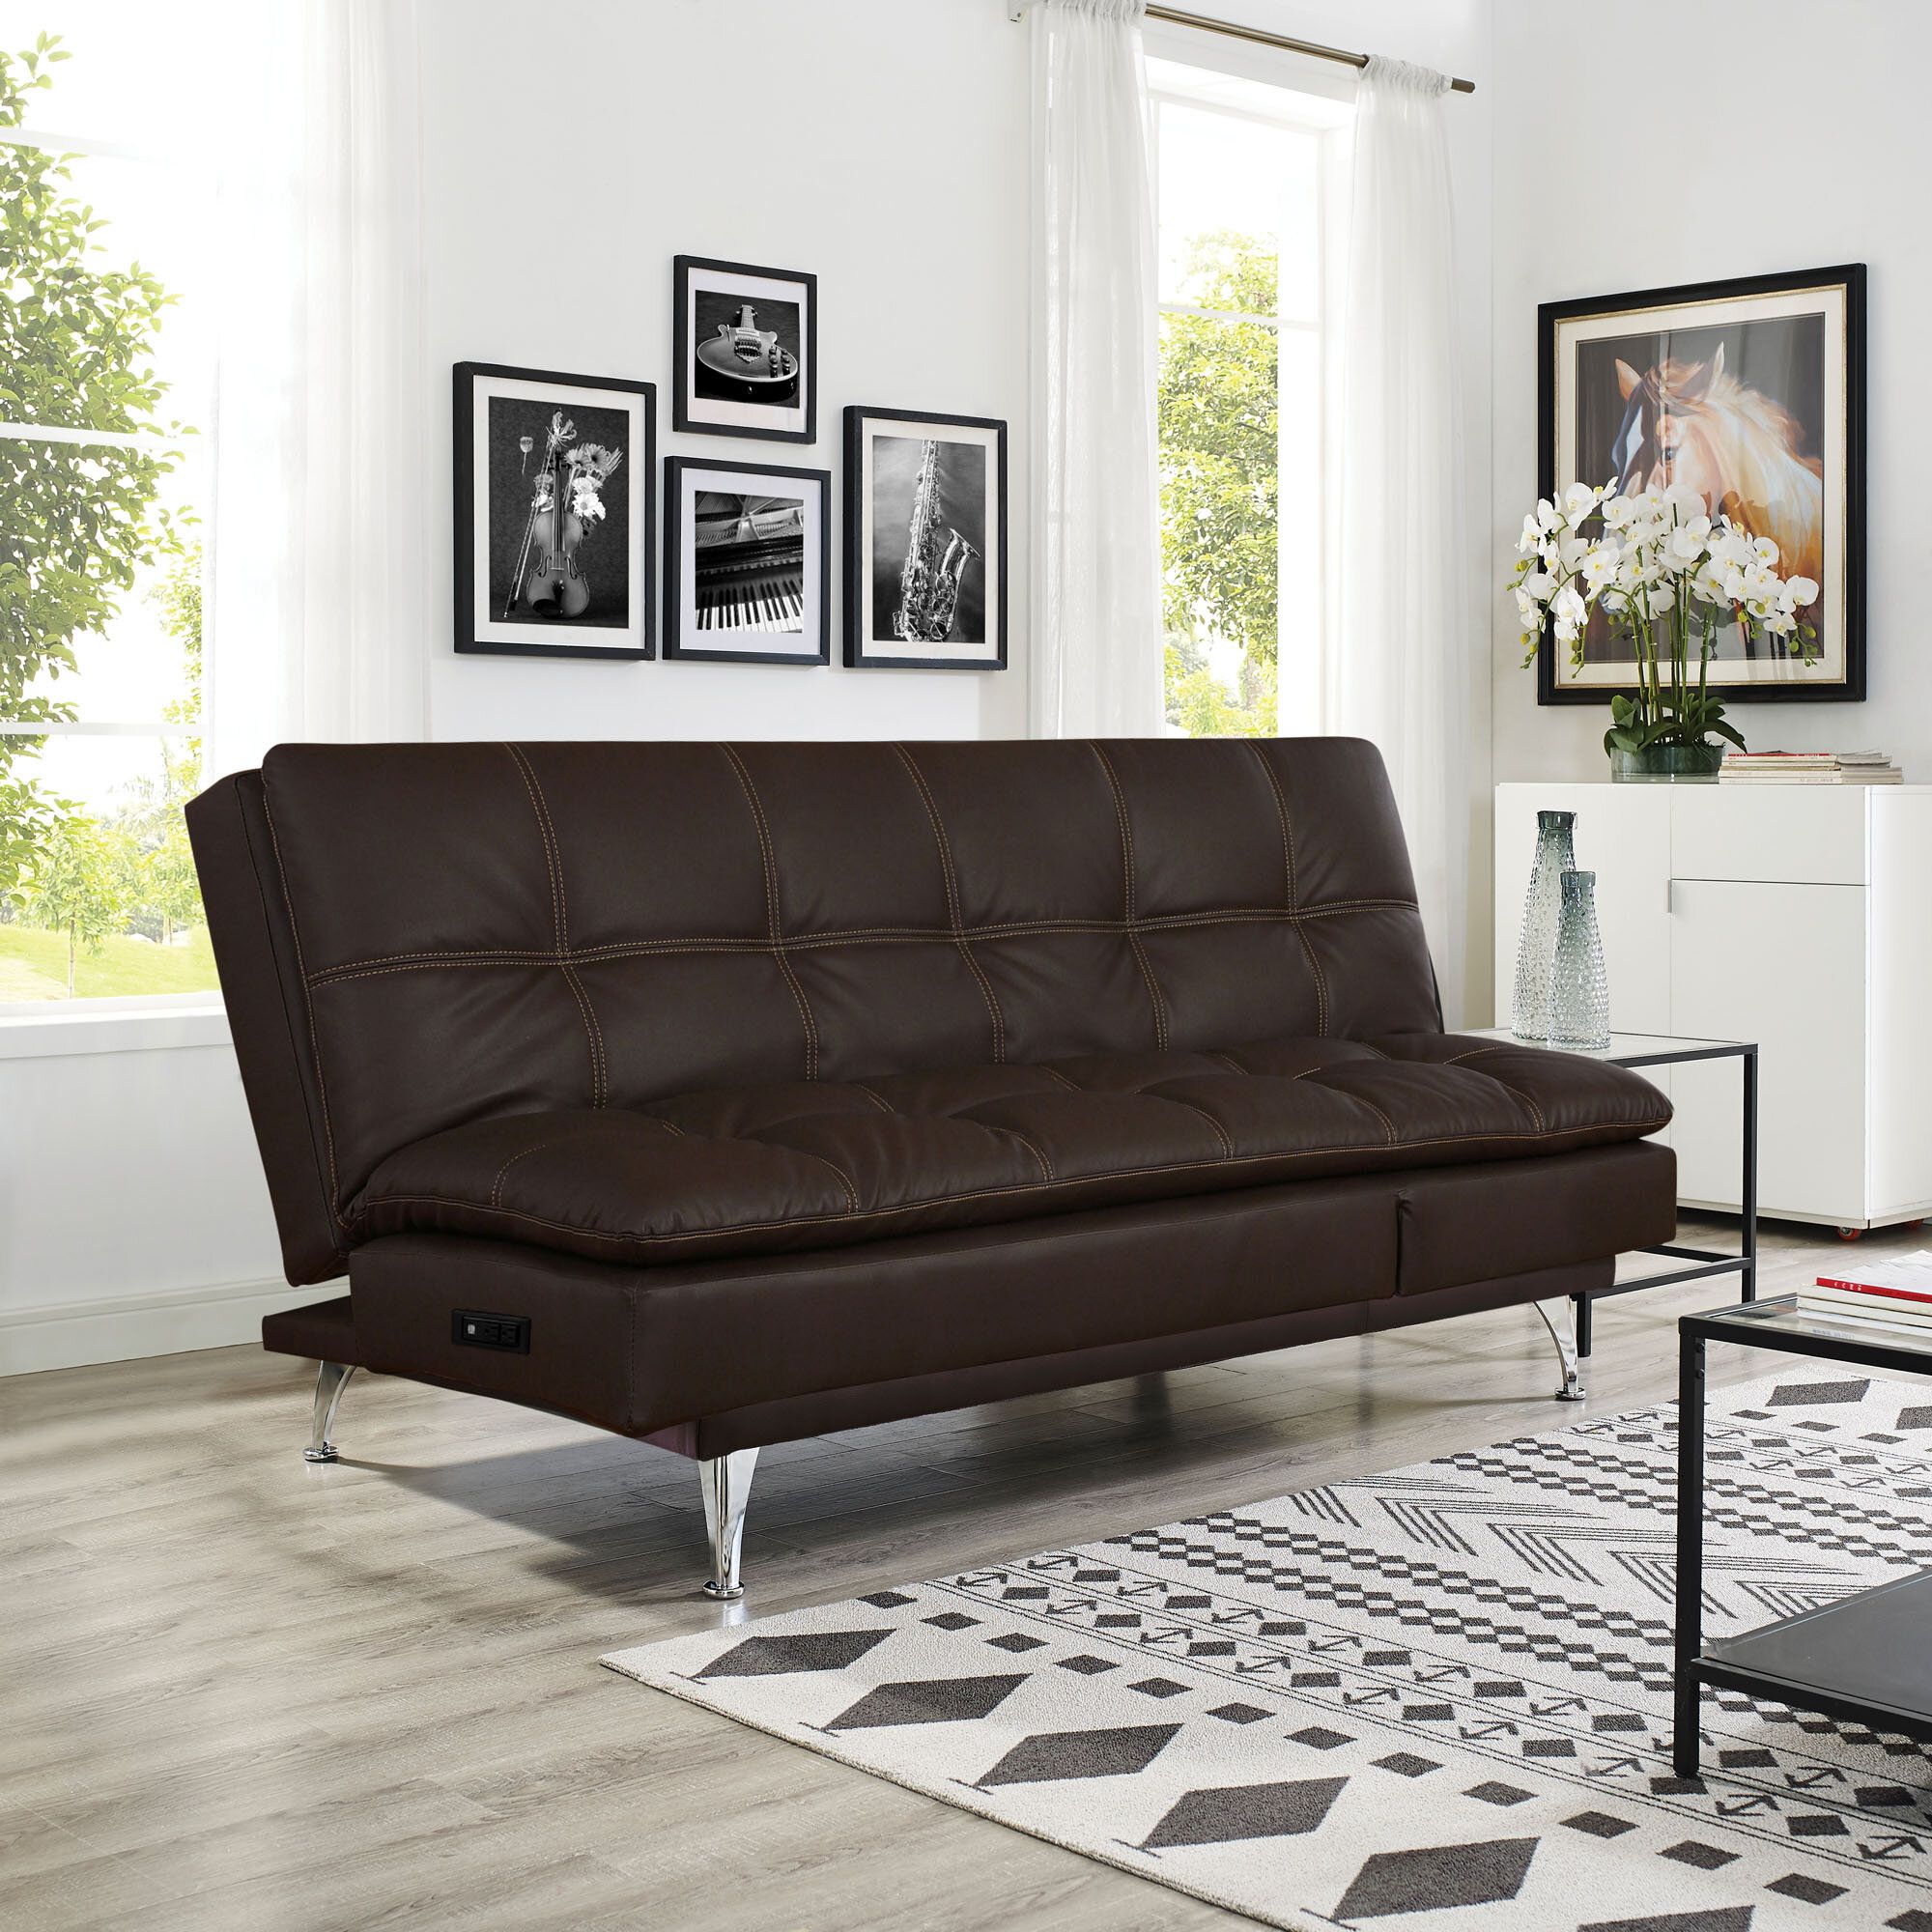 Serta Marie 78.9'' Faux Leather Tufted Convertible Sleeper Sofa | Wayfair In Tufted Convertible Sleeper Sofas (Gallery 3 of 20)